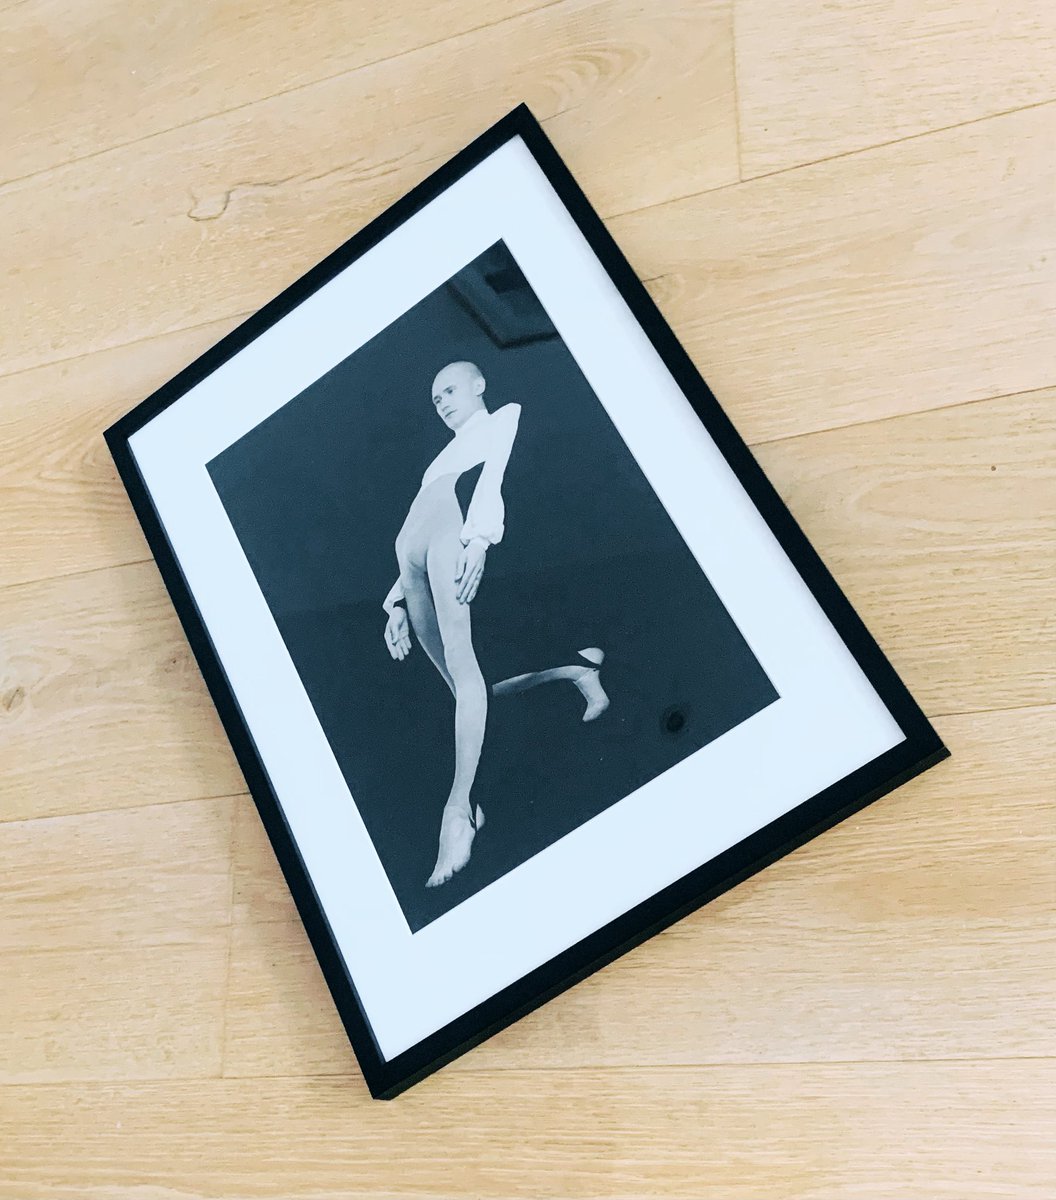 The inimitable Michael Clark of @MichaelClarkCo perfectly captured by @hugoglendinning who very kindly gifted me this artist’s proof. I am so lucky to work with the most talented of people. Thank you Hugo! Hope you like the frame? Simple lines to complement the image.